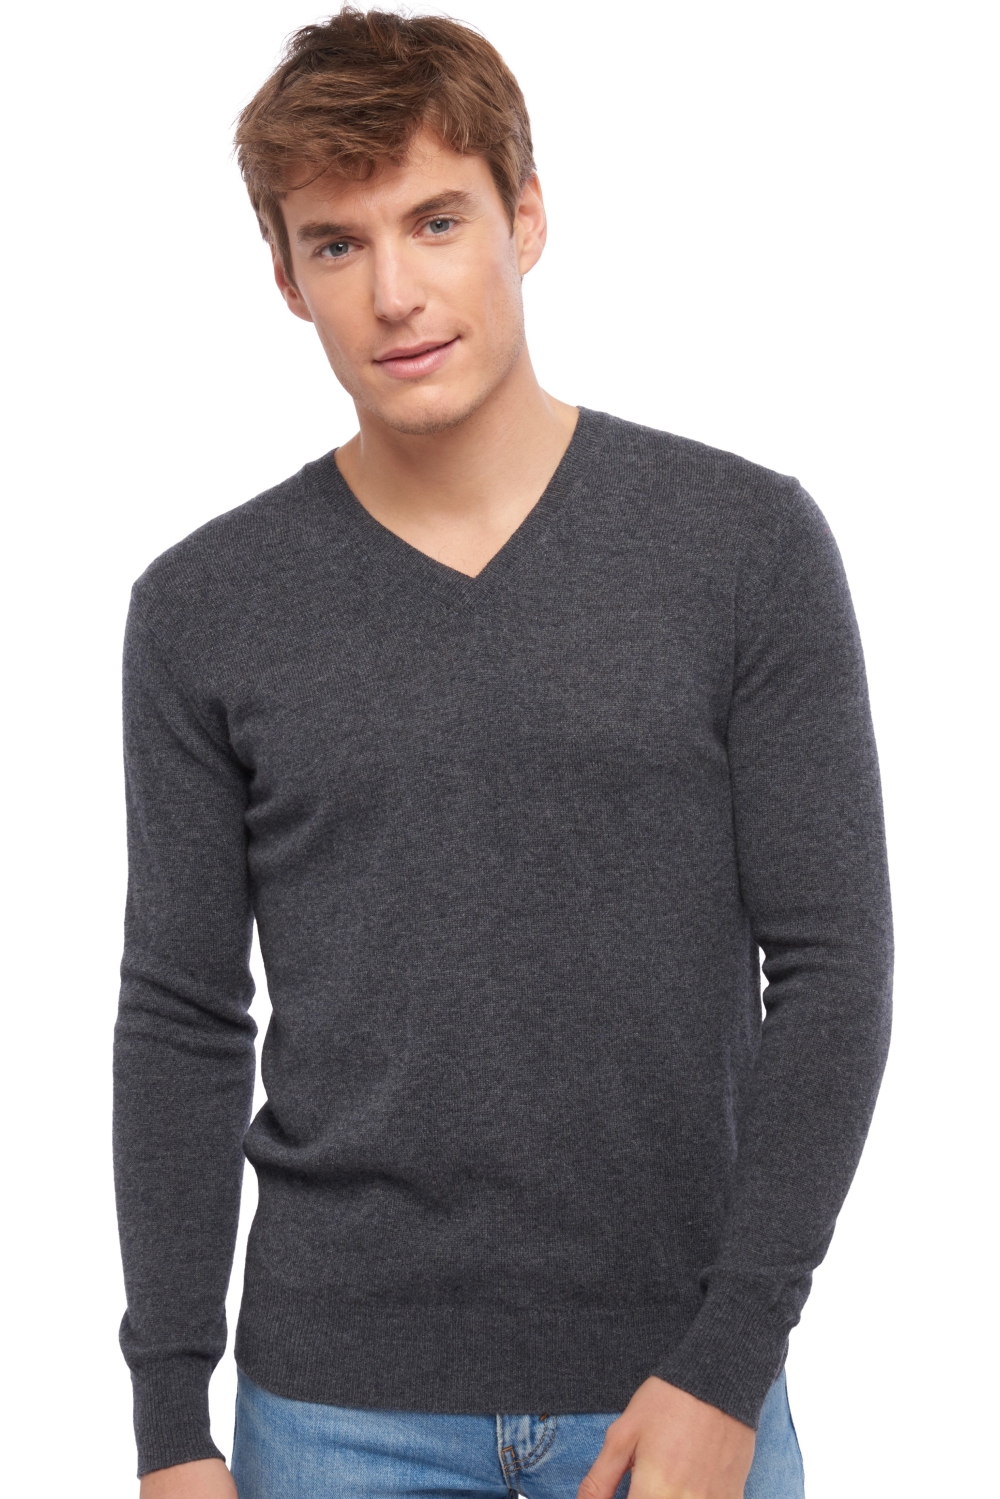 Cashmere men basic sweaters at low prices tor first dark grey m